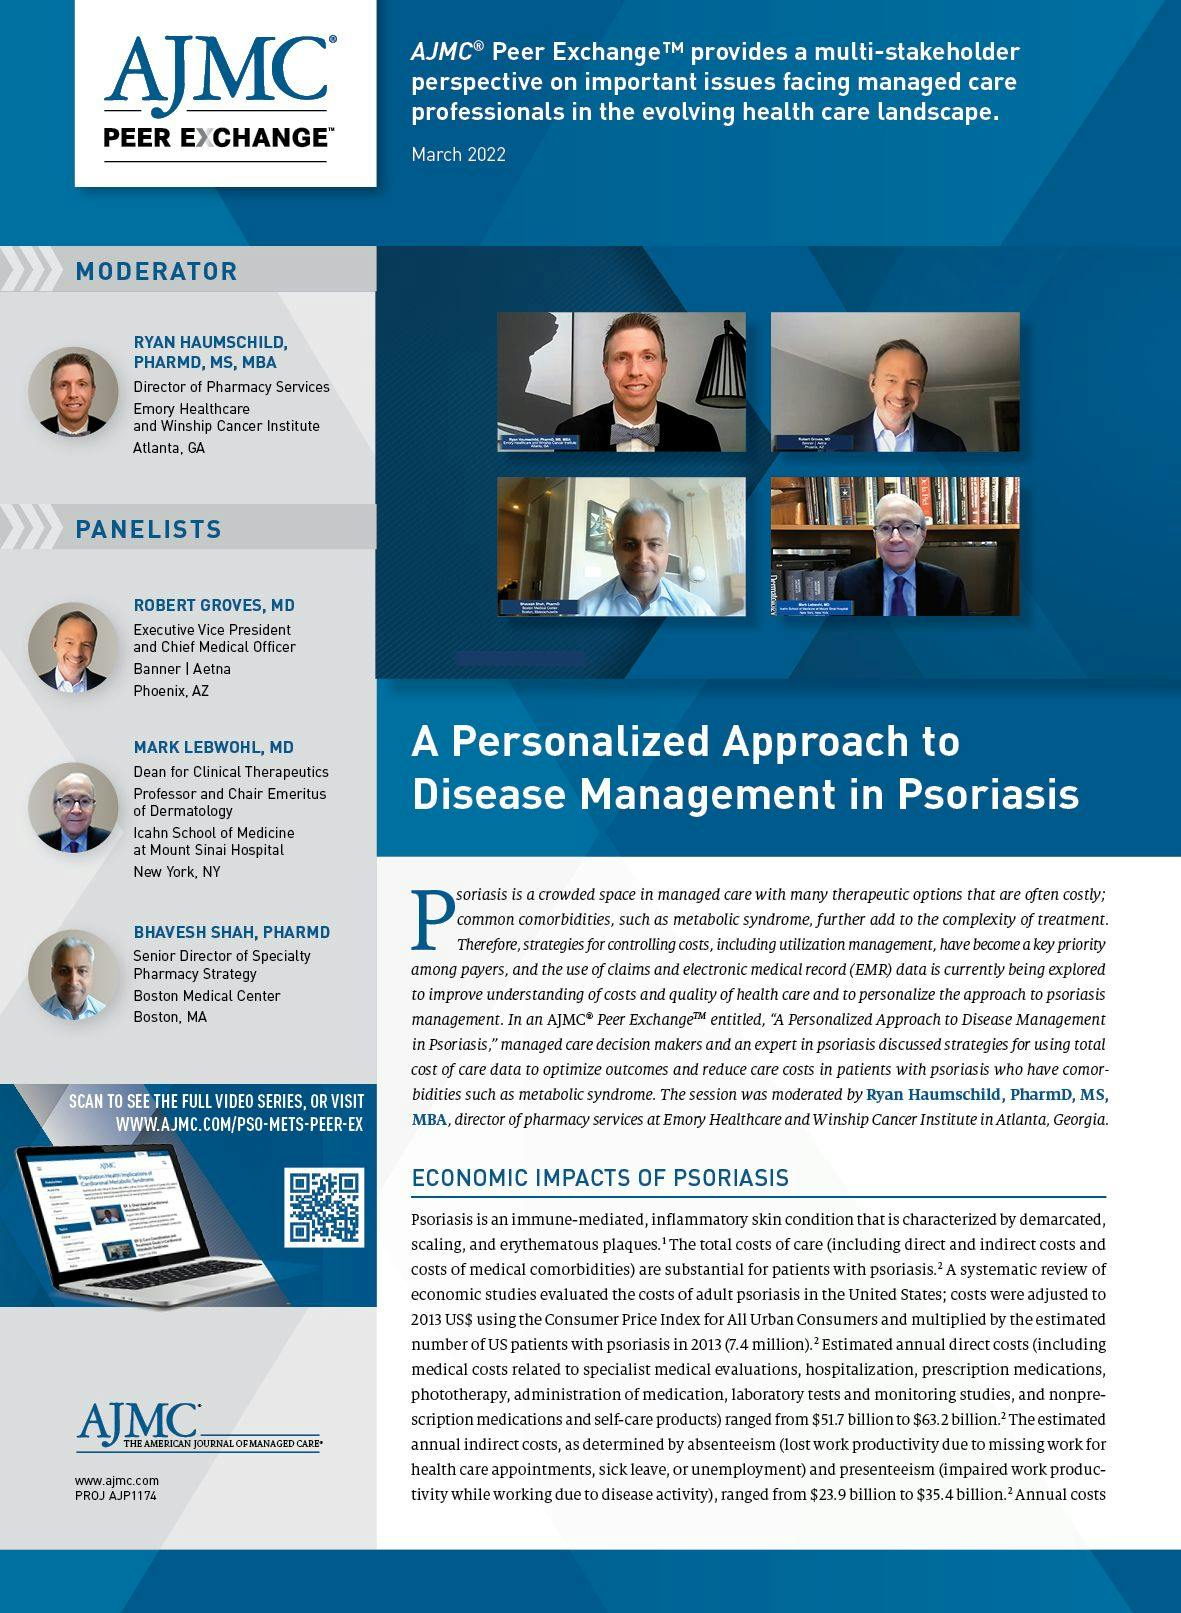 A Personalized Approach to Disease Management in Psoriasis